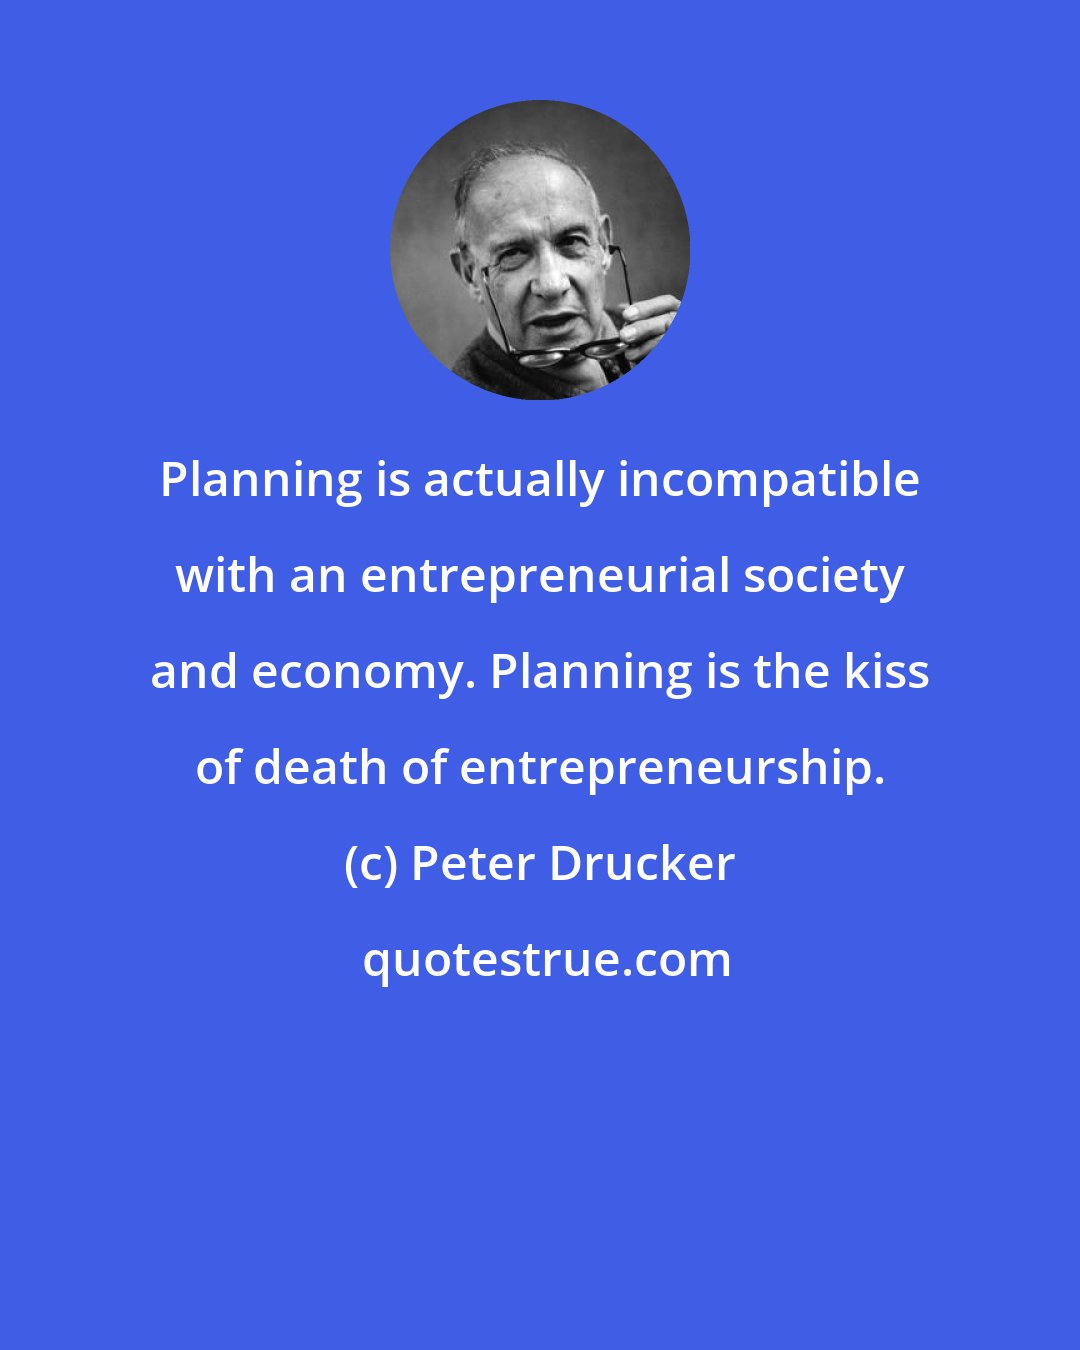 Peter Drucker: Planning is actually incompatible with an entrepreneurial society and economy. Planning is the kiss of death of entrepreneurship.